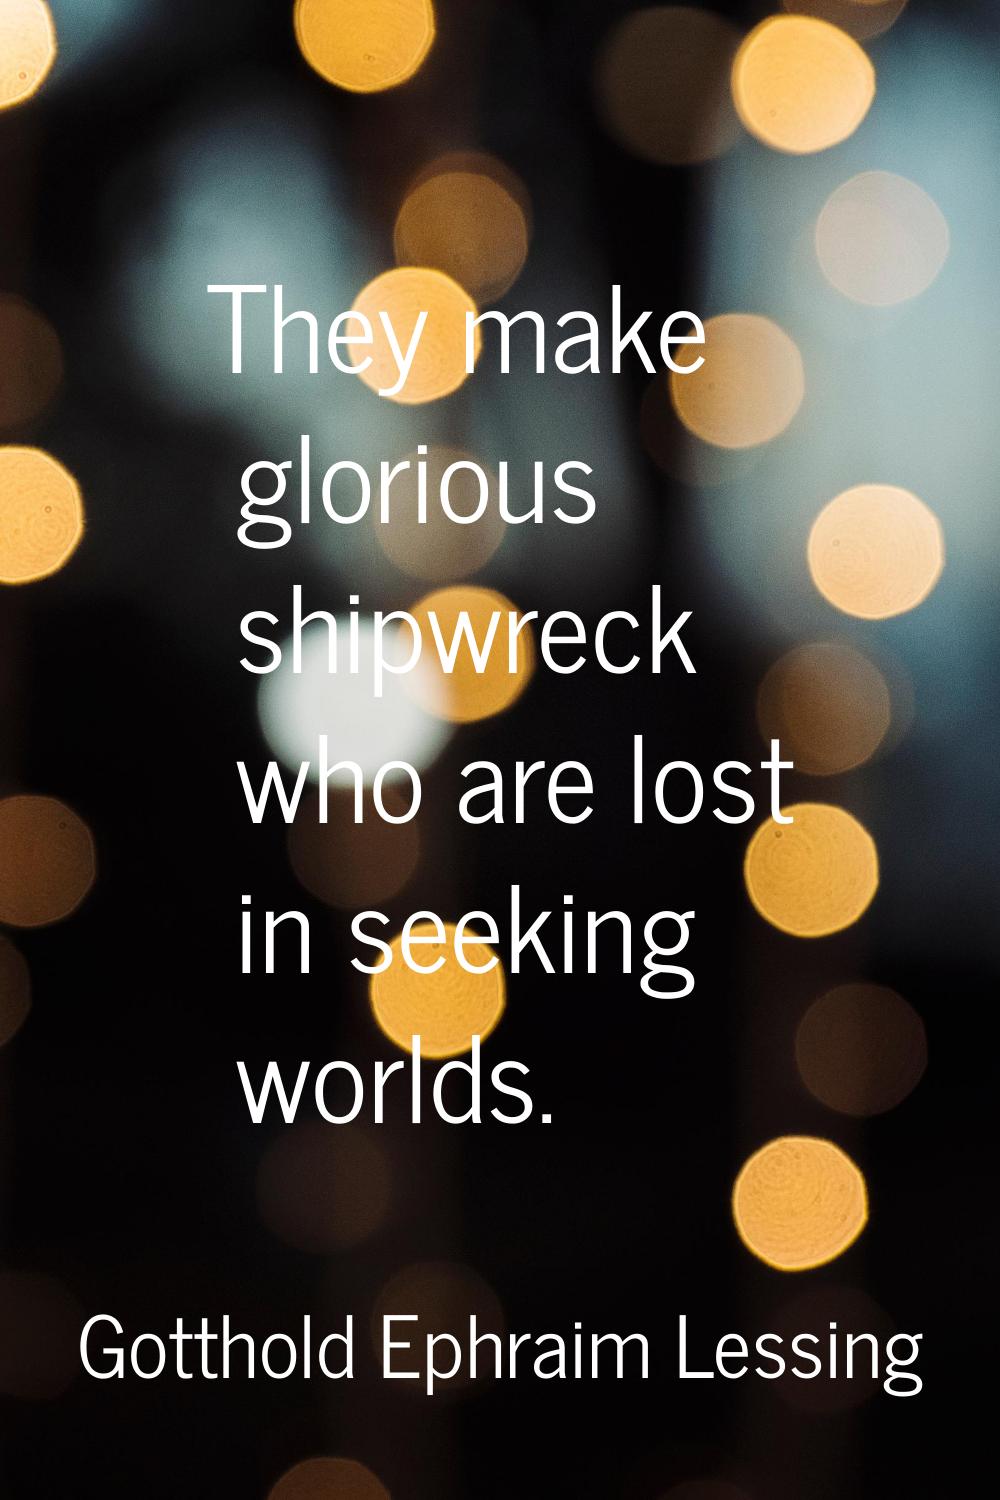 They make glorious shipwreck who are lost in seeking worlds.